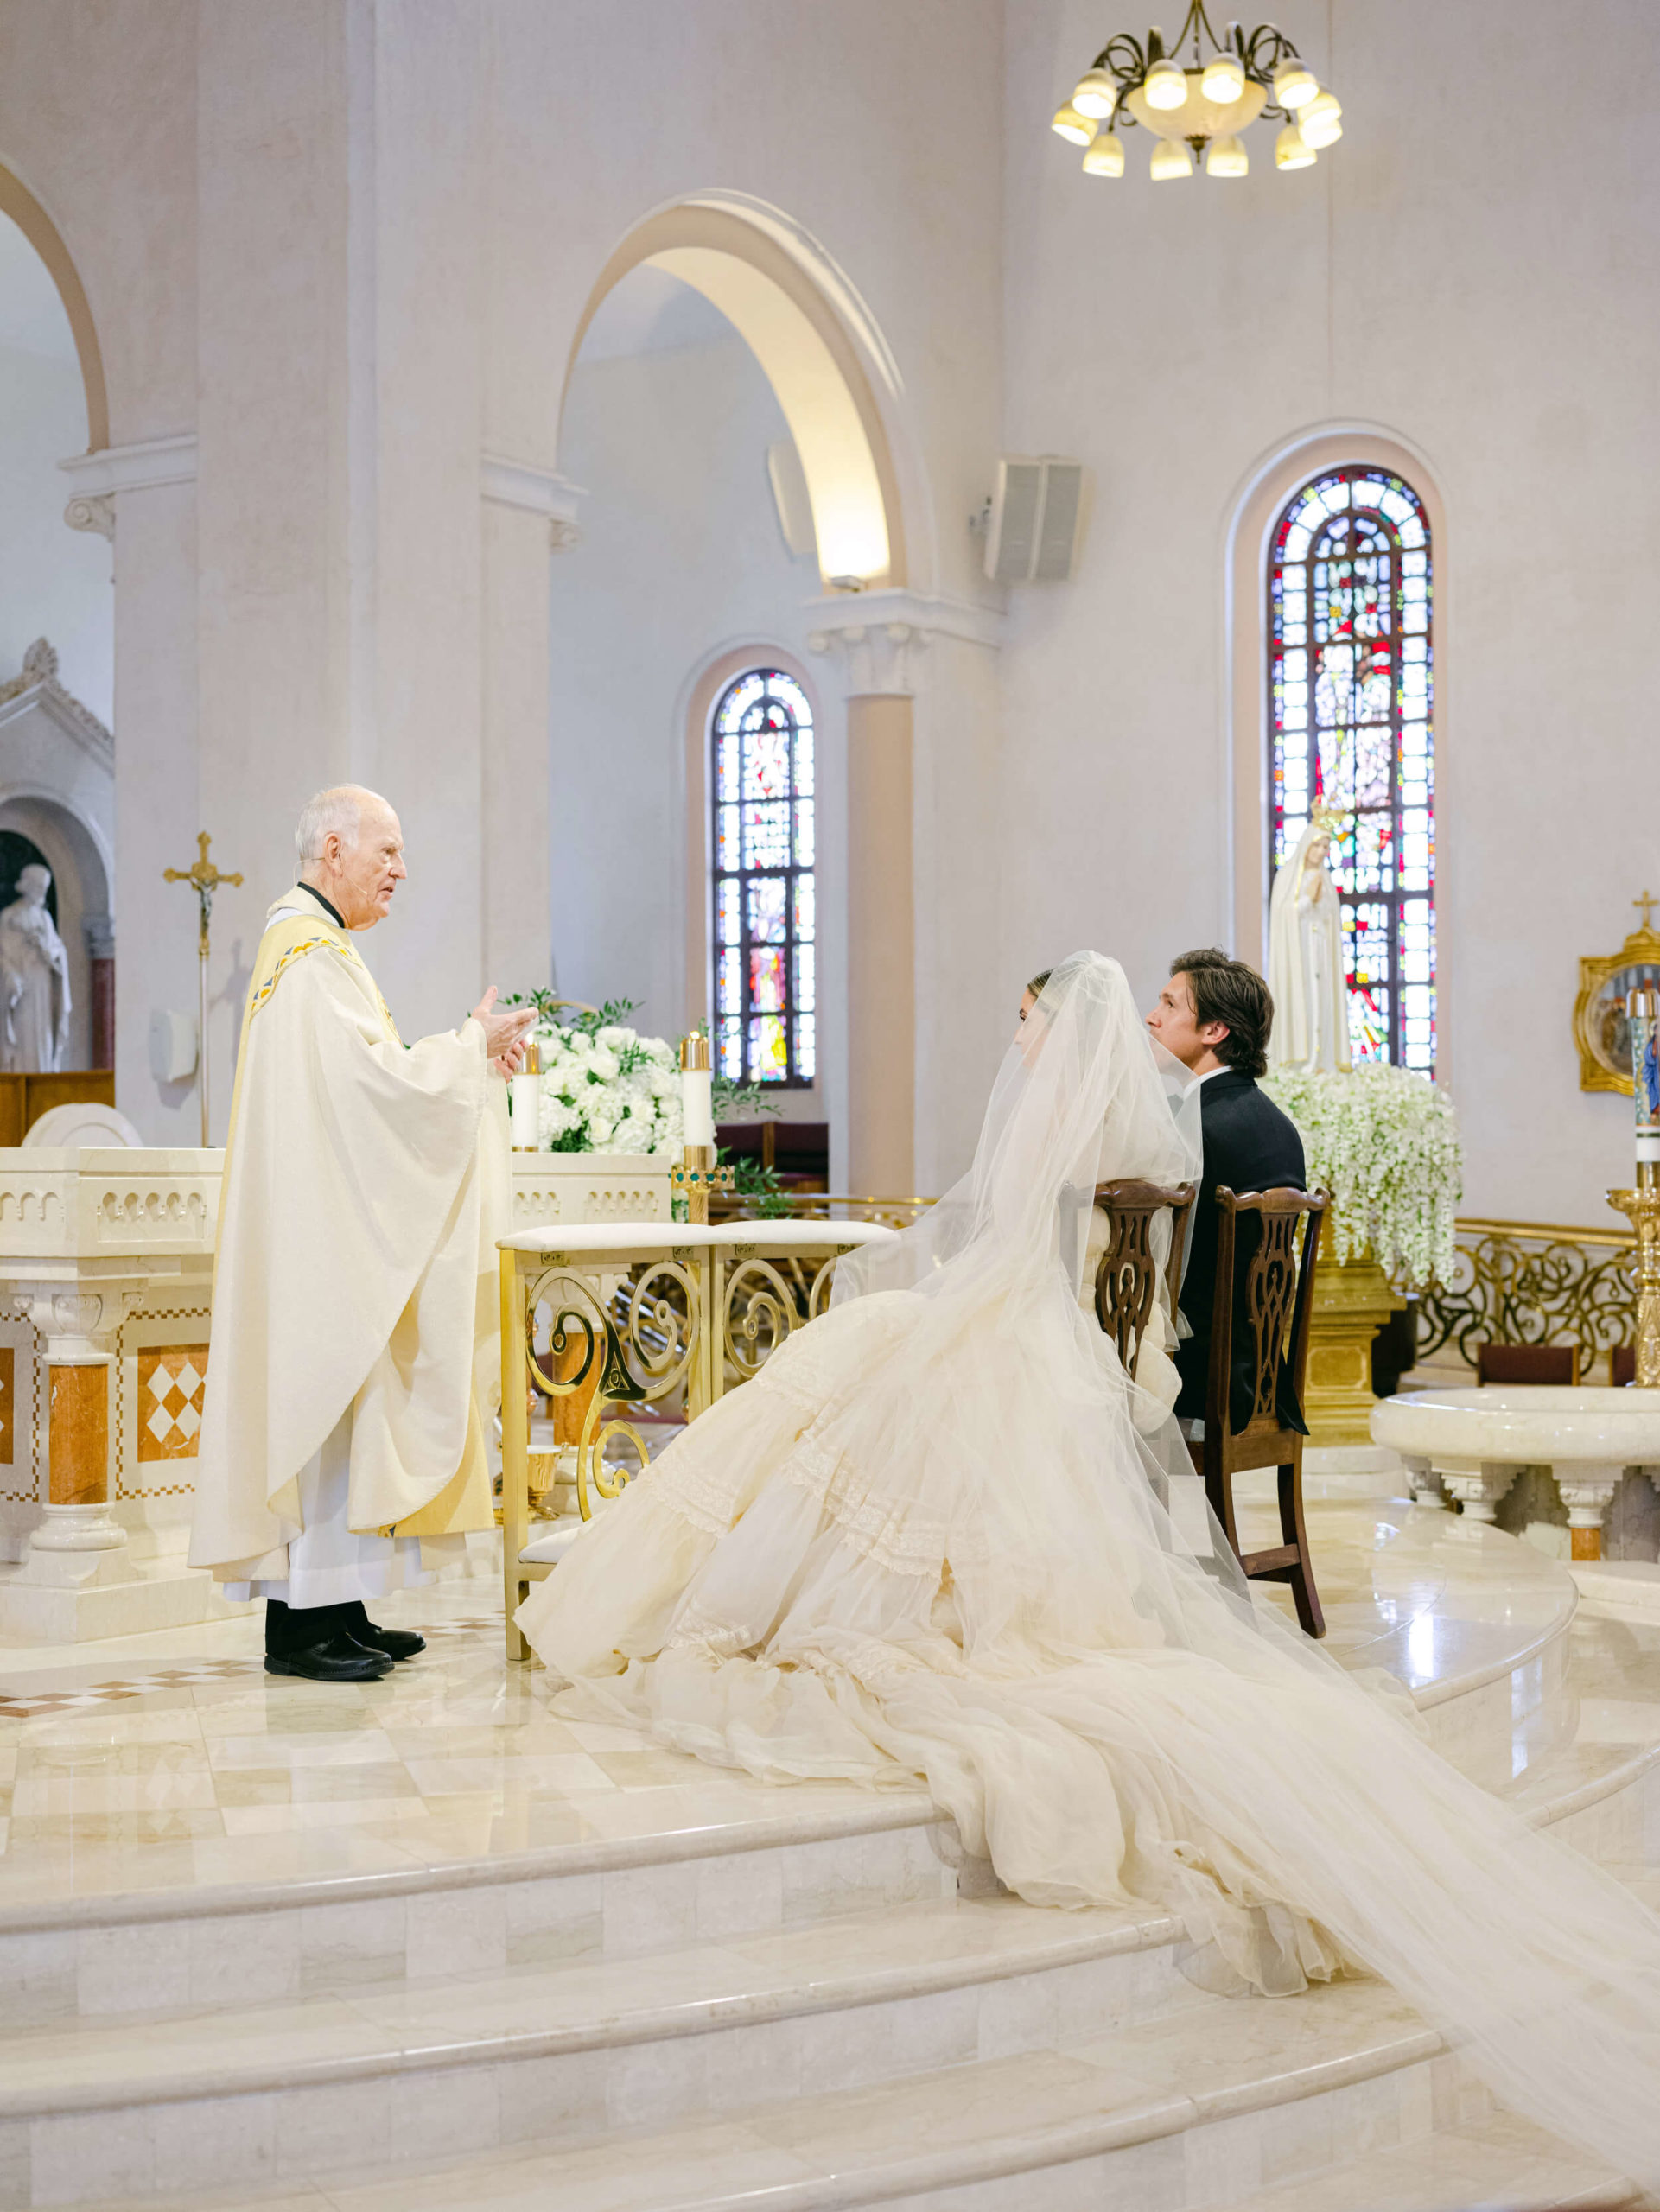 Eunice and Mikey married at St. Patricks Catholic Church in Miami, where she grew up going all her life.